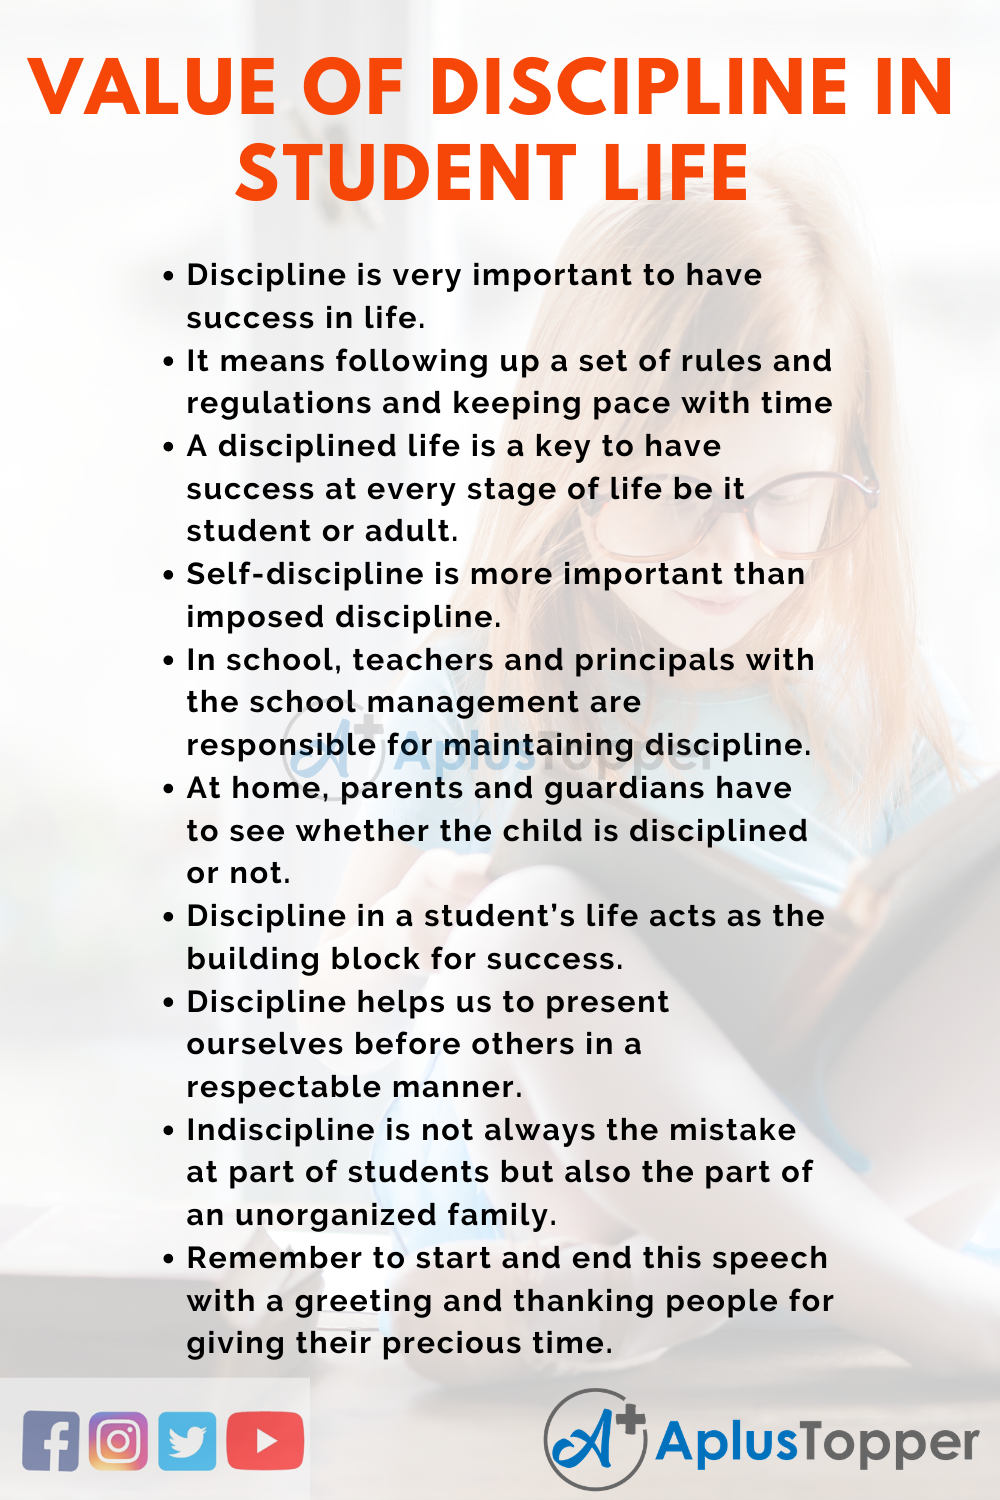 1 minute speech on importance of discipline in students life